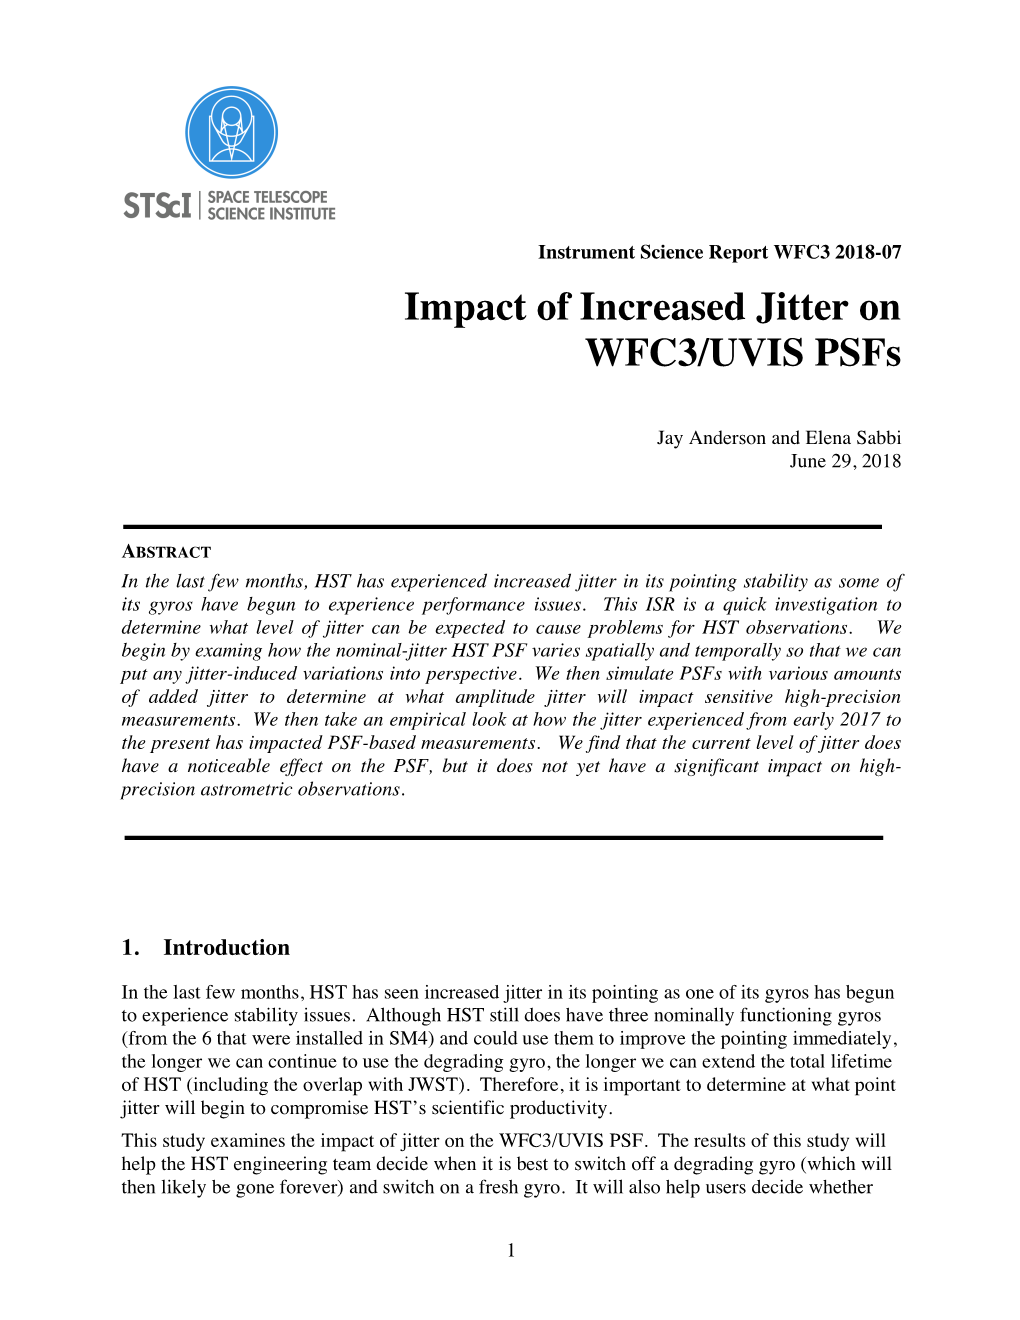 Impact of Increased Jitter on WFC3/UVIS Psfs